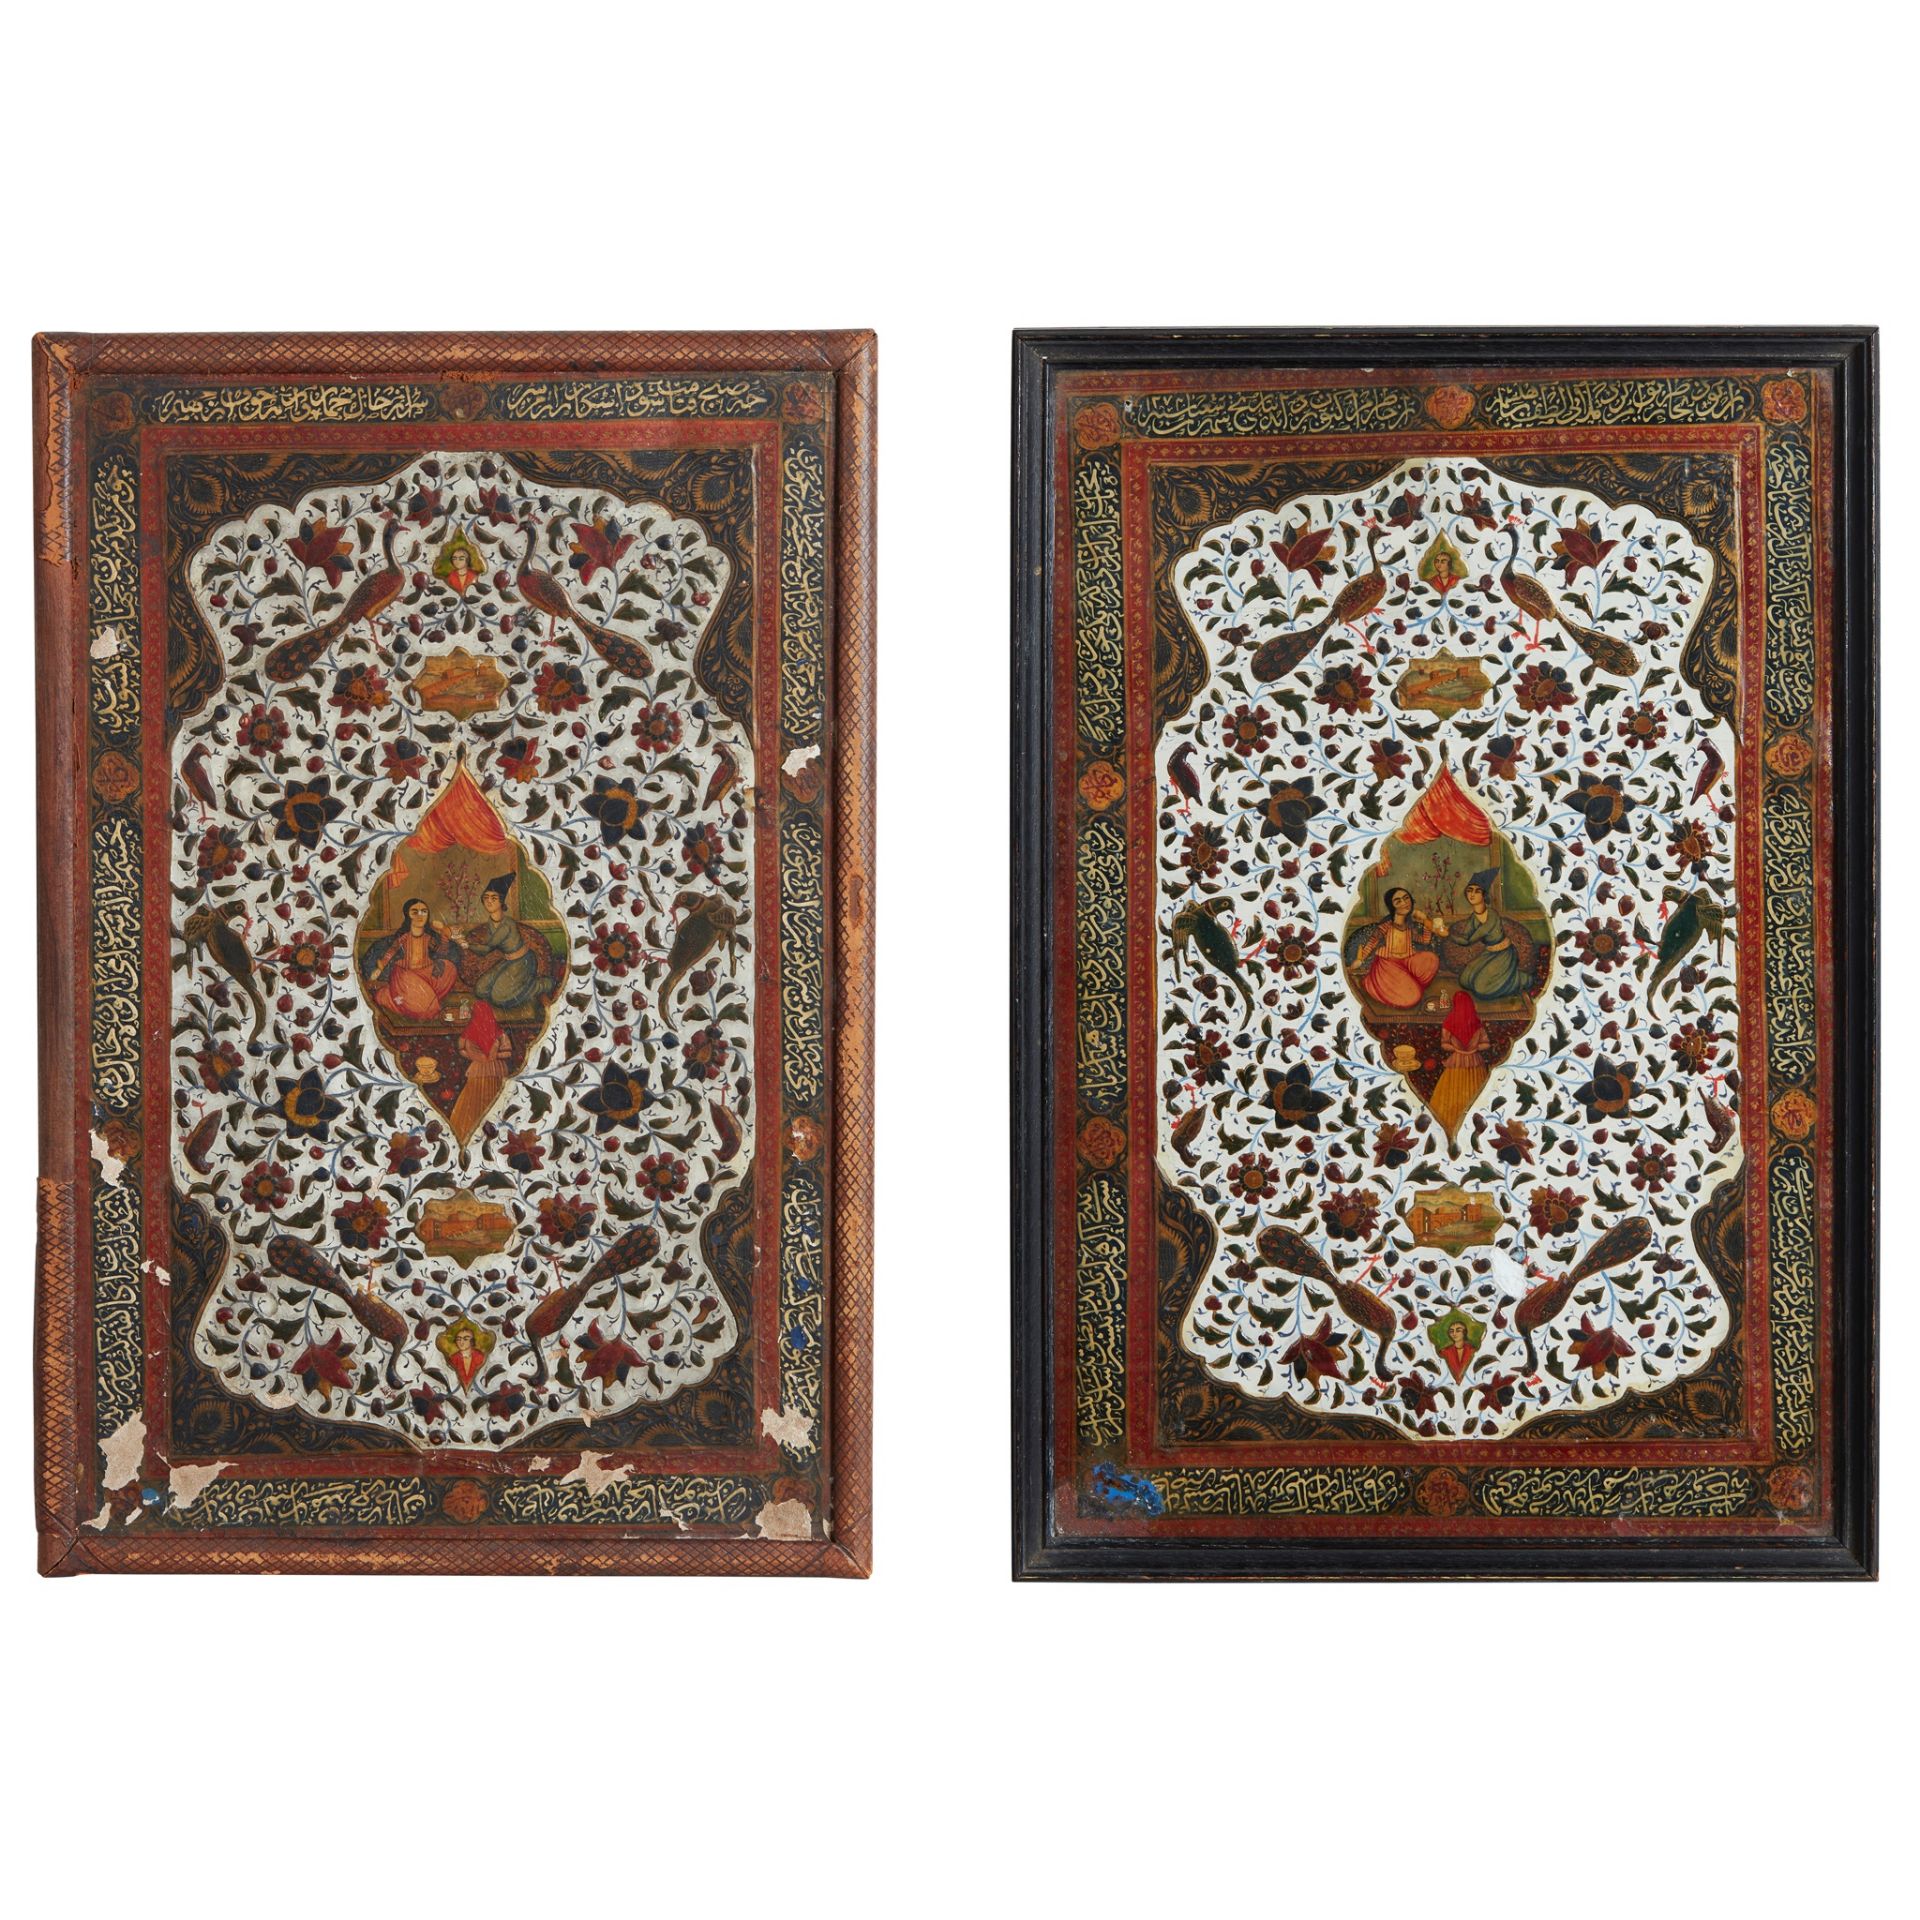 TWO QAJAR LACQUERED LEATHER PAPIER MACHE BOOK COVERS PERSIA, 19TH CENTURY